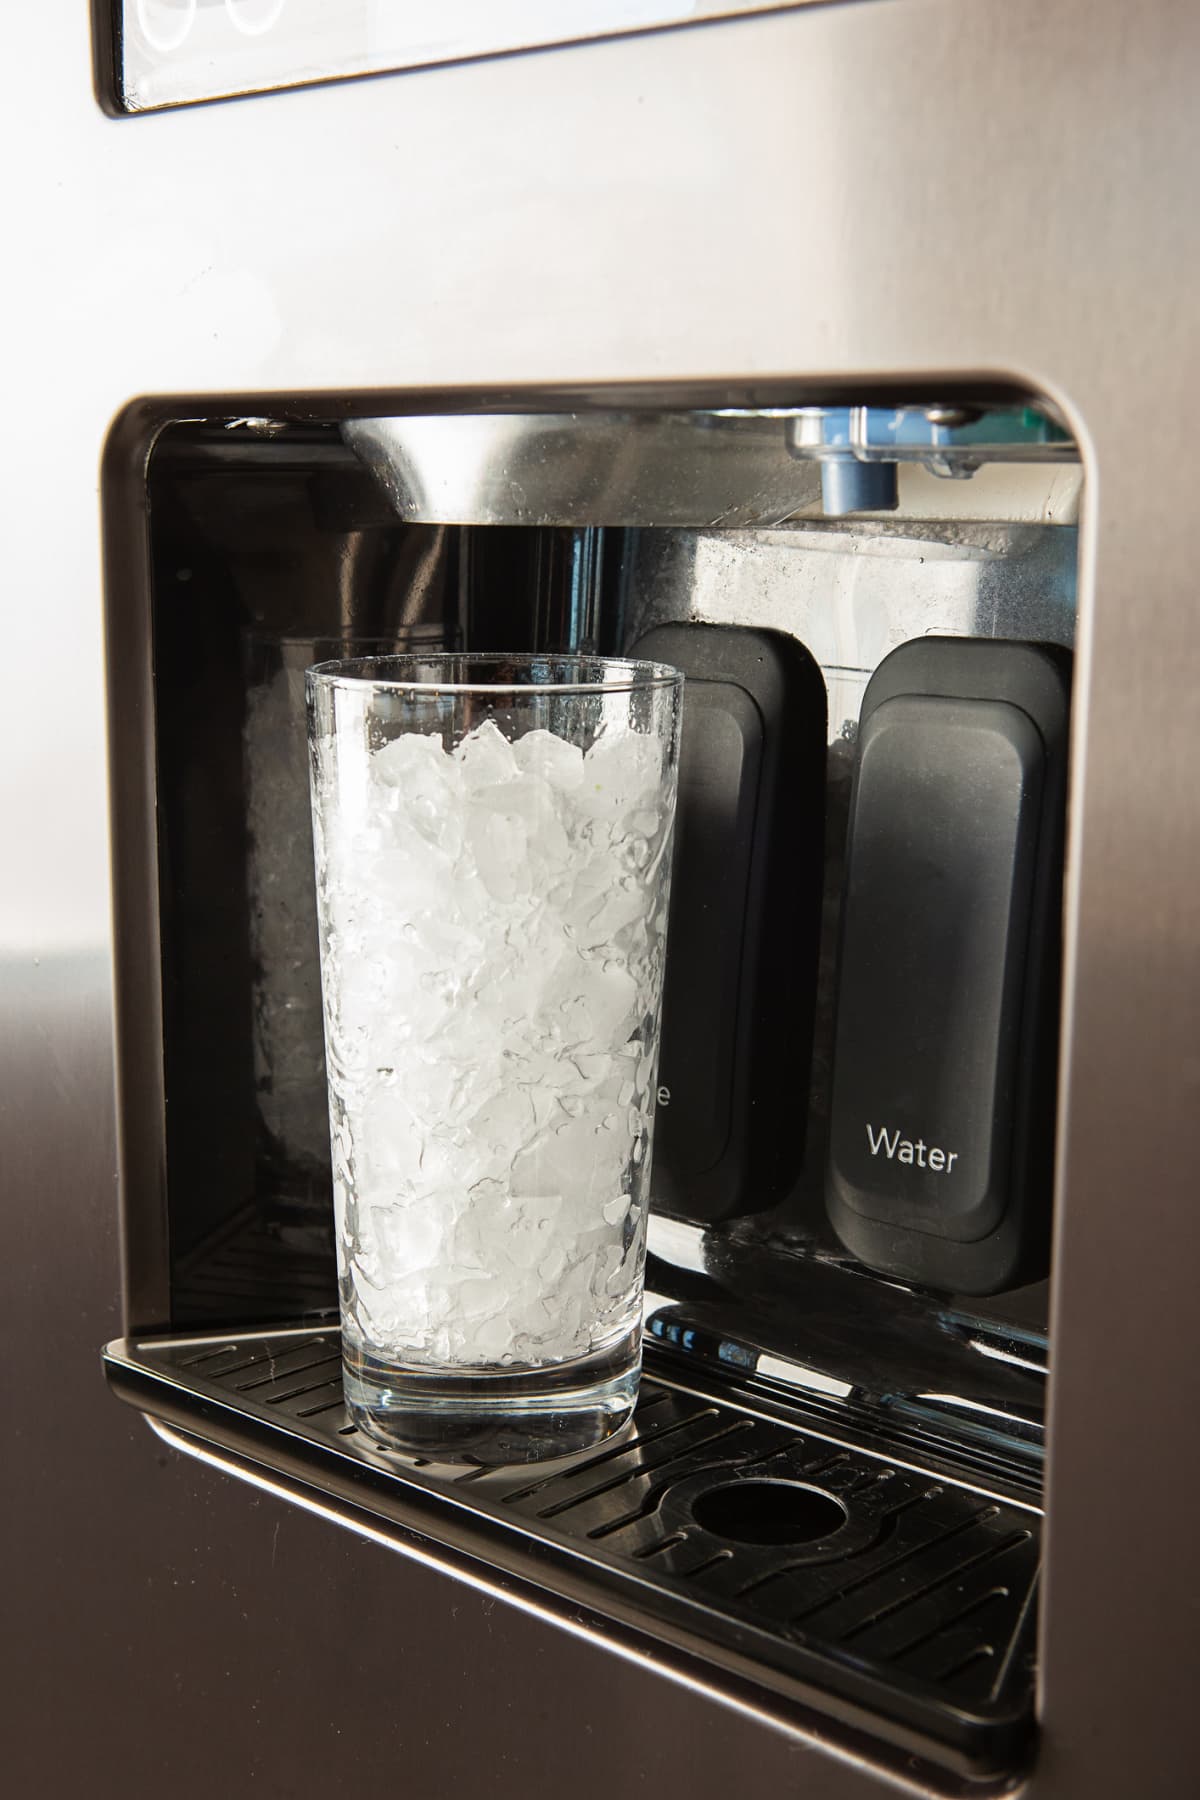 Ice maker dispensing ice into a glass.